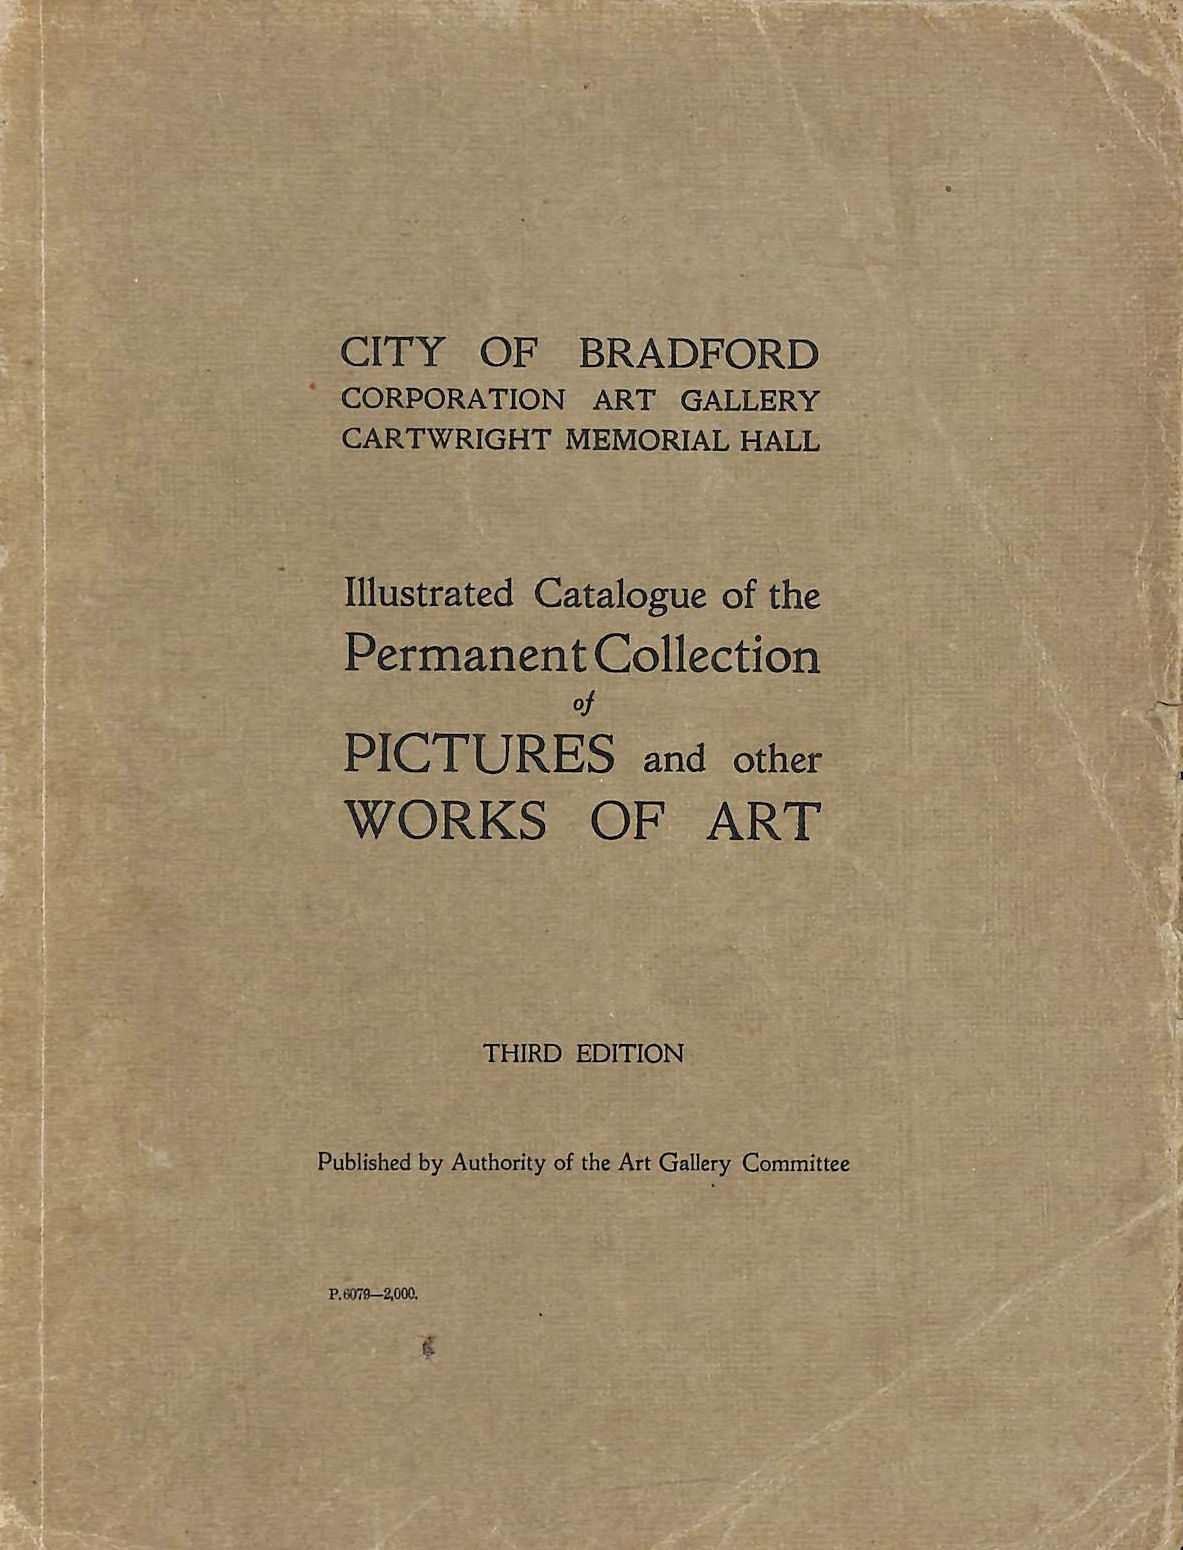 ART GALLERY COMMITTEE - Illustrated Catalogue of the Permanent Collection of Pictures and Other Works of Art